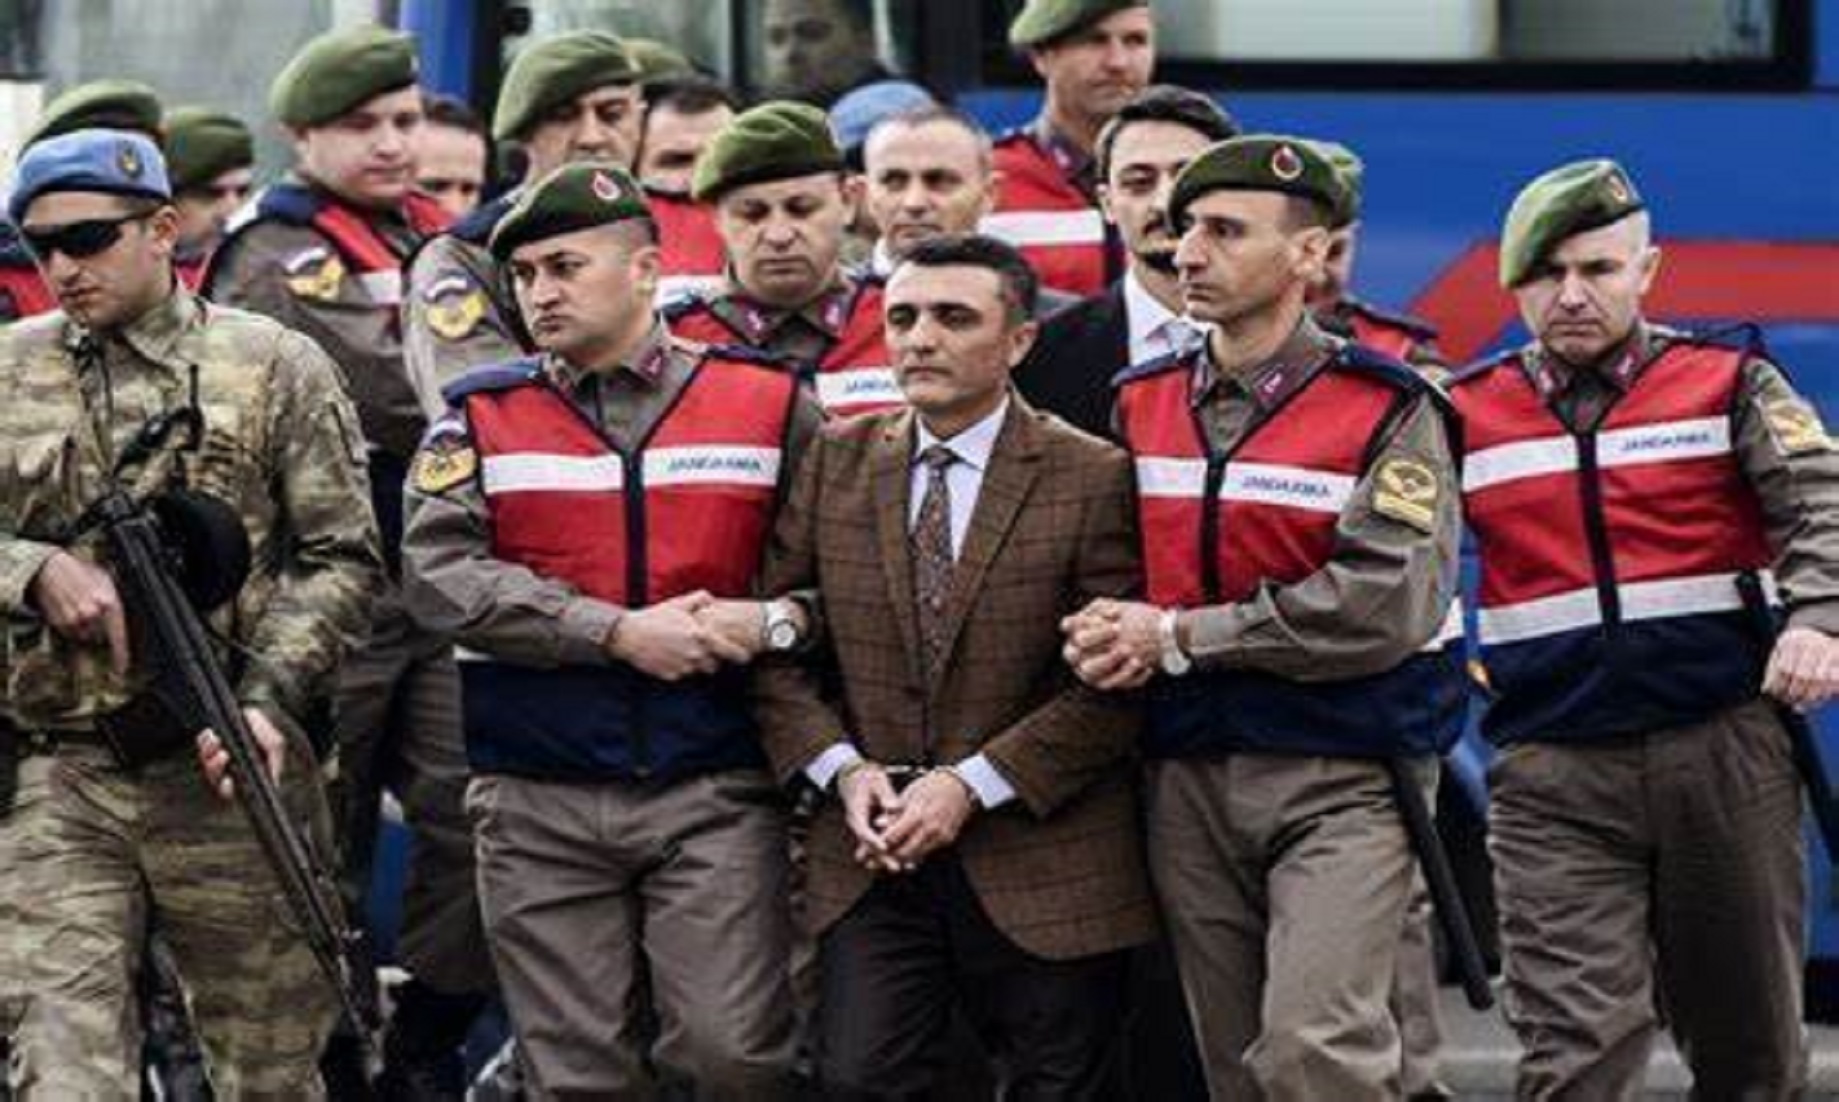 Turkey Issues Arrest Warrant For 19 More Suspects Over Failed Coup In 2016